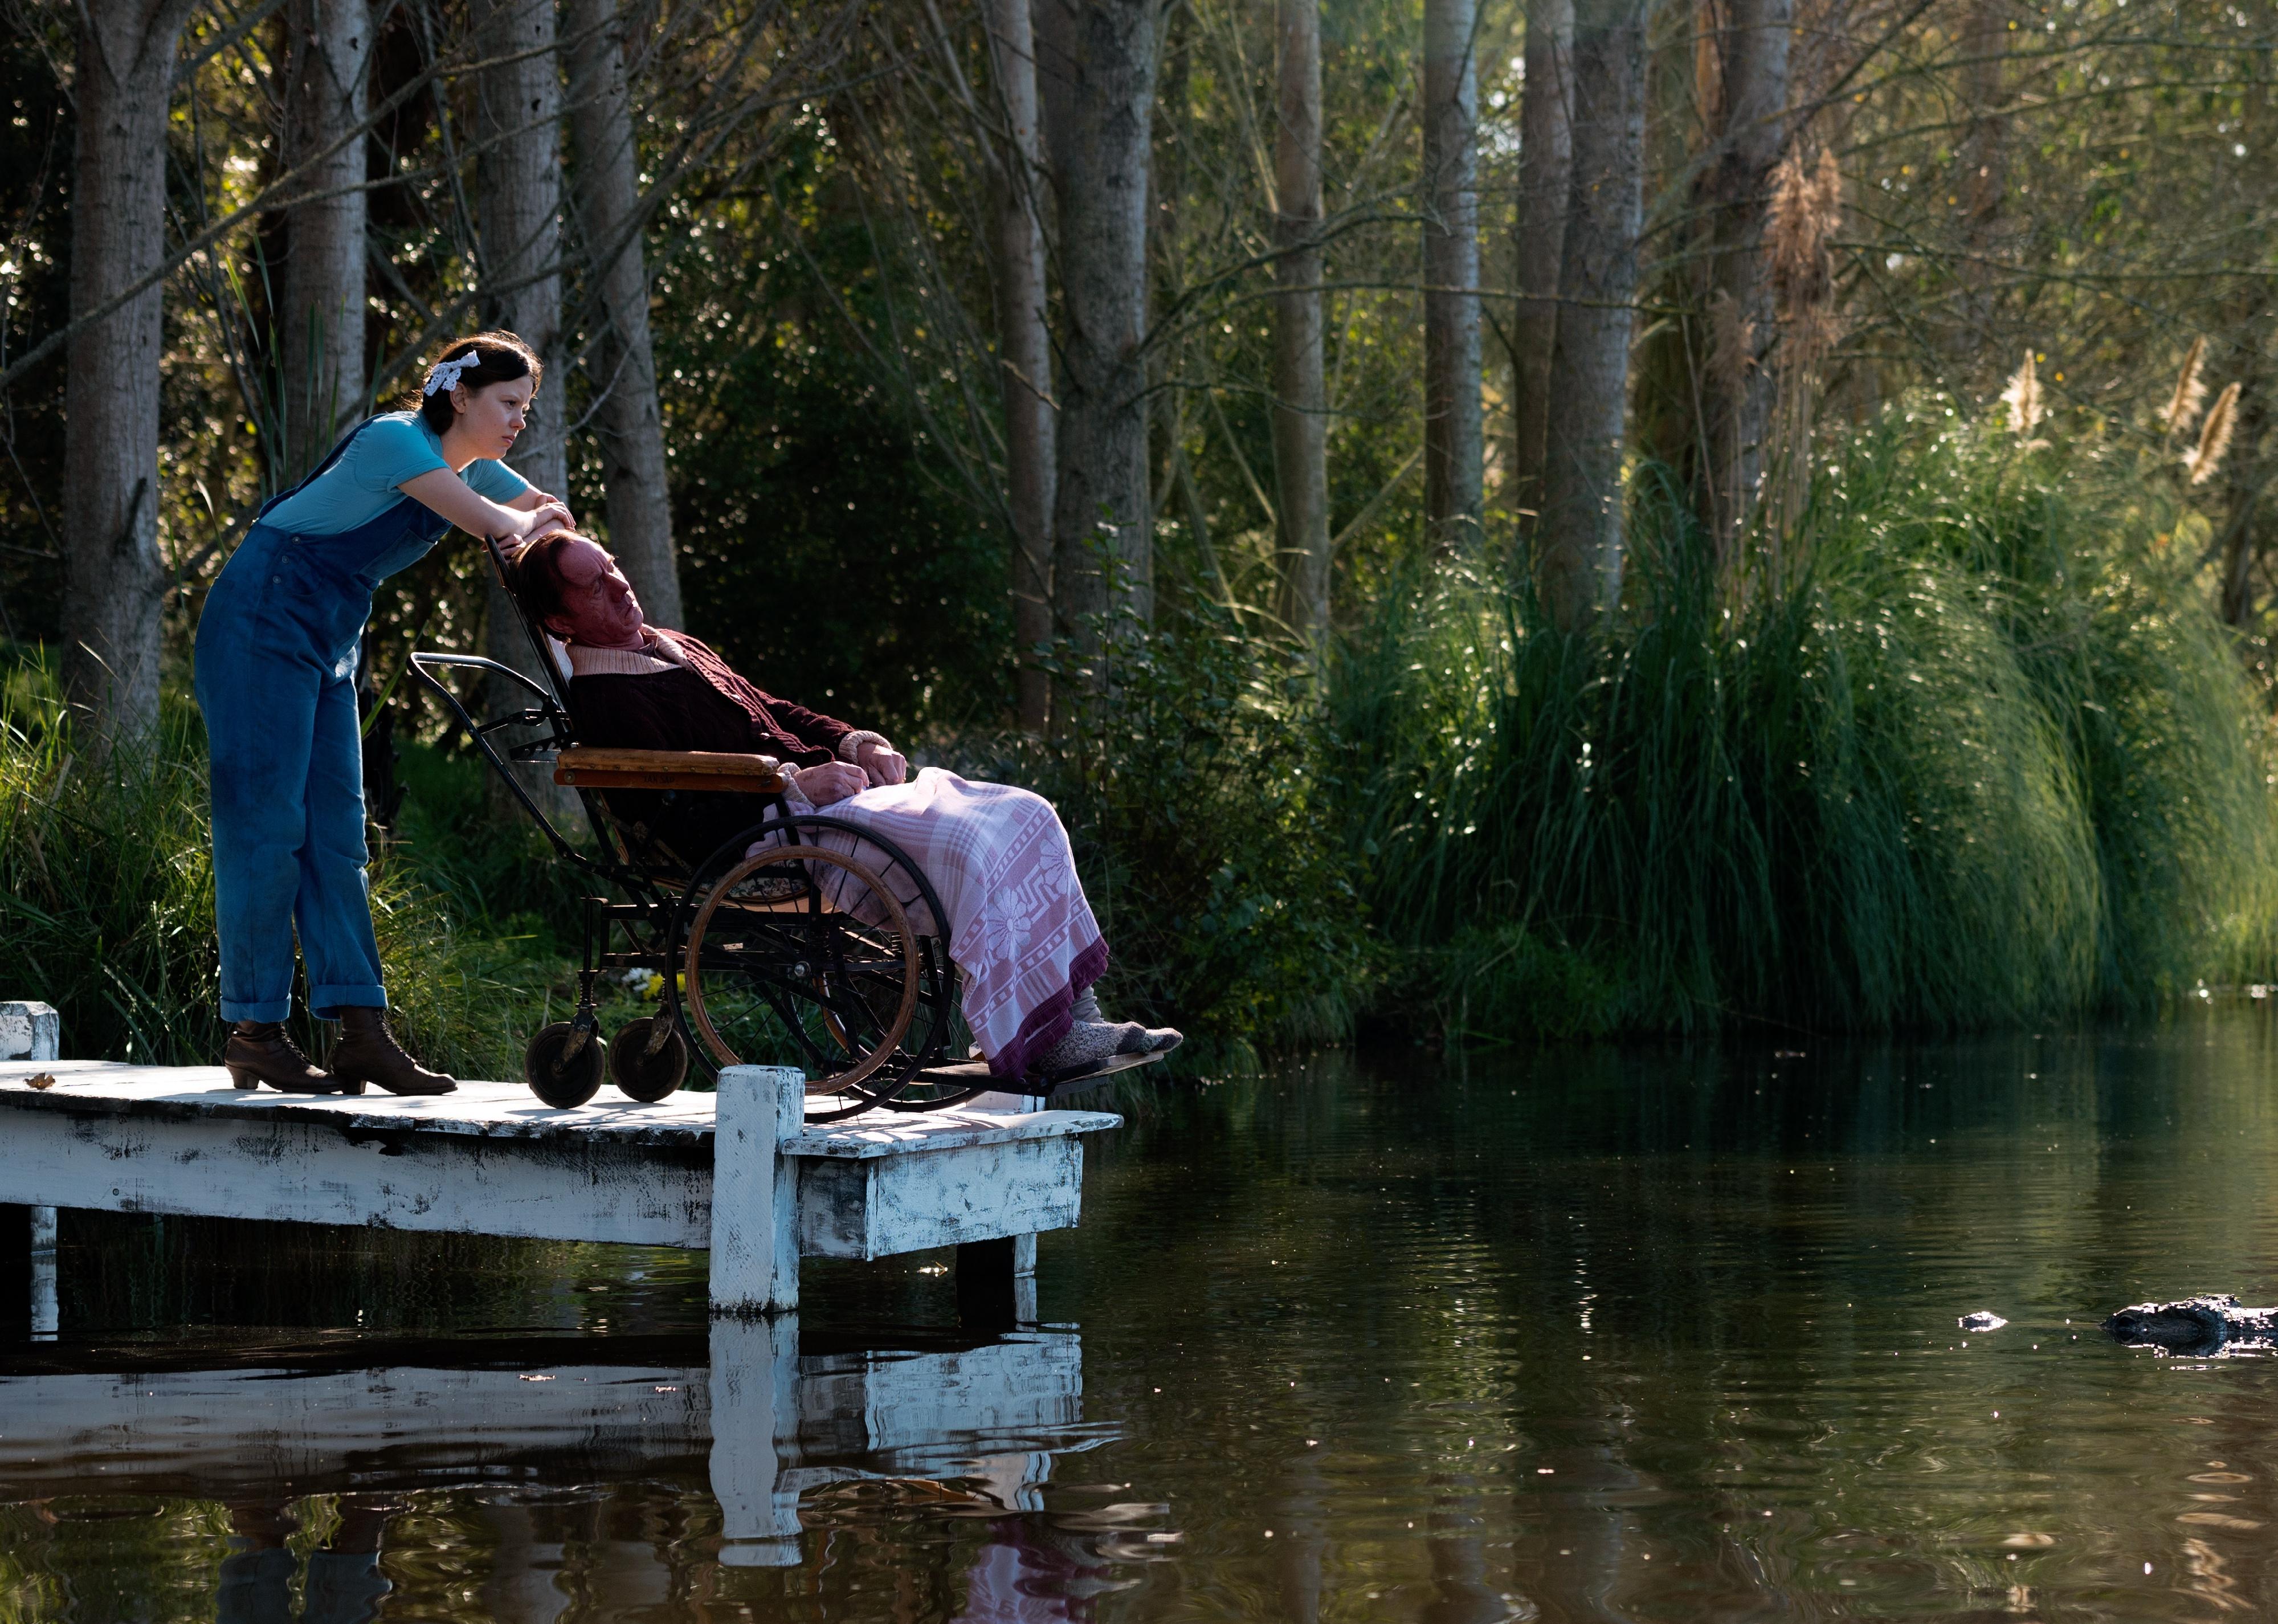 A young woman in overalls standing on a dock with a man in a wheelchair